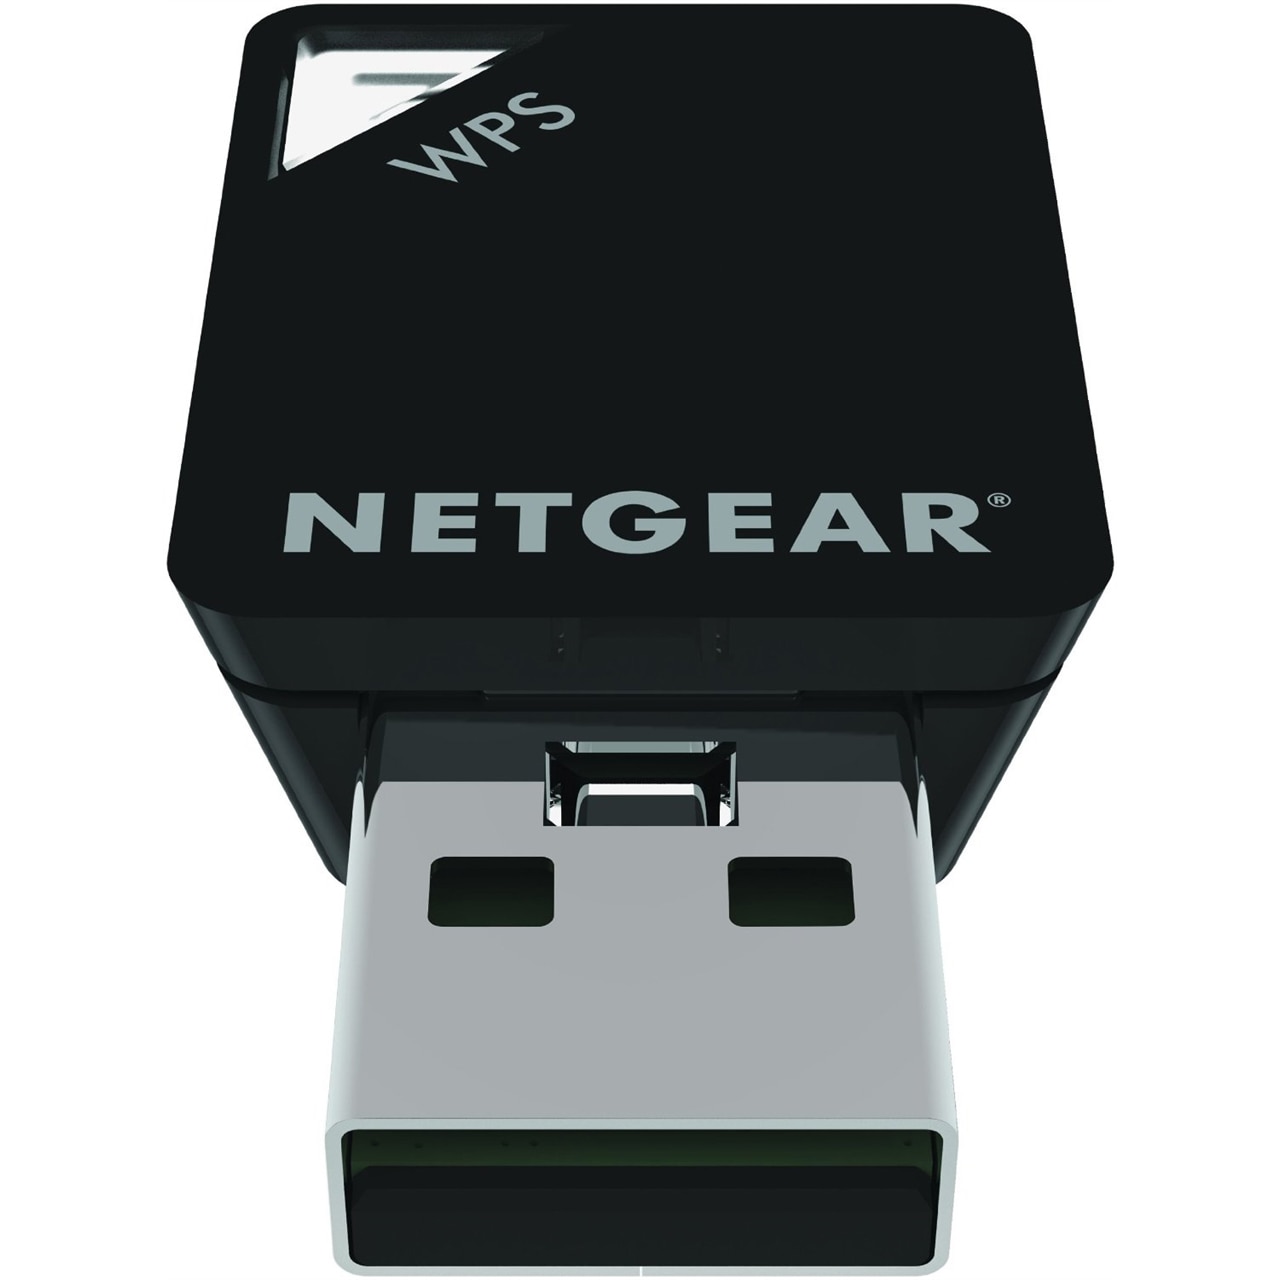 what is netgear n150 wireless usb adapter used for